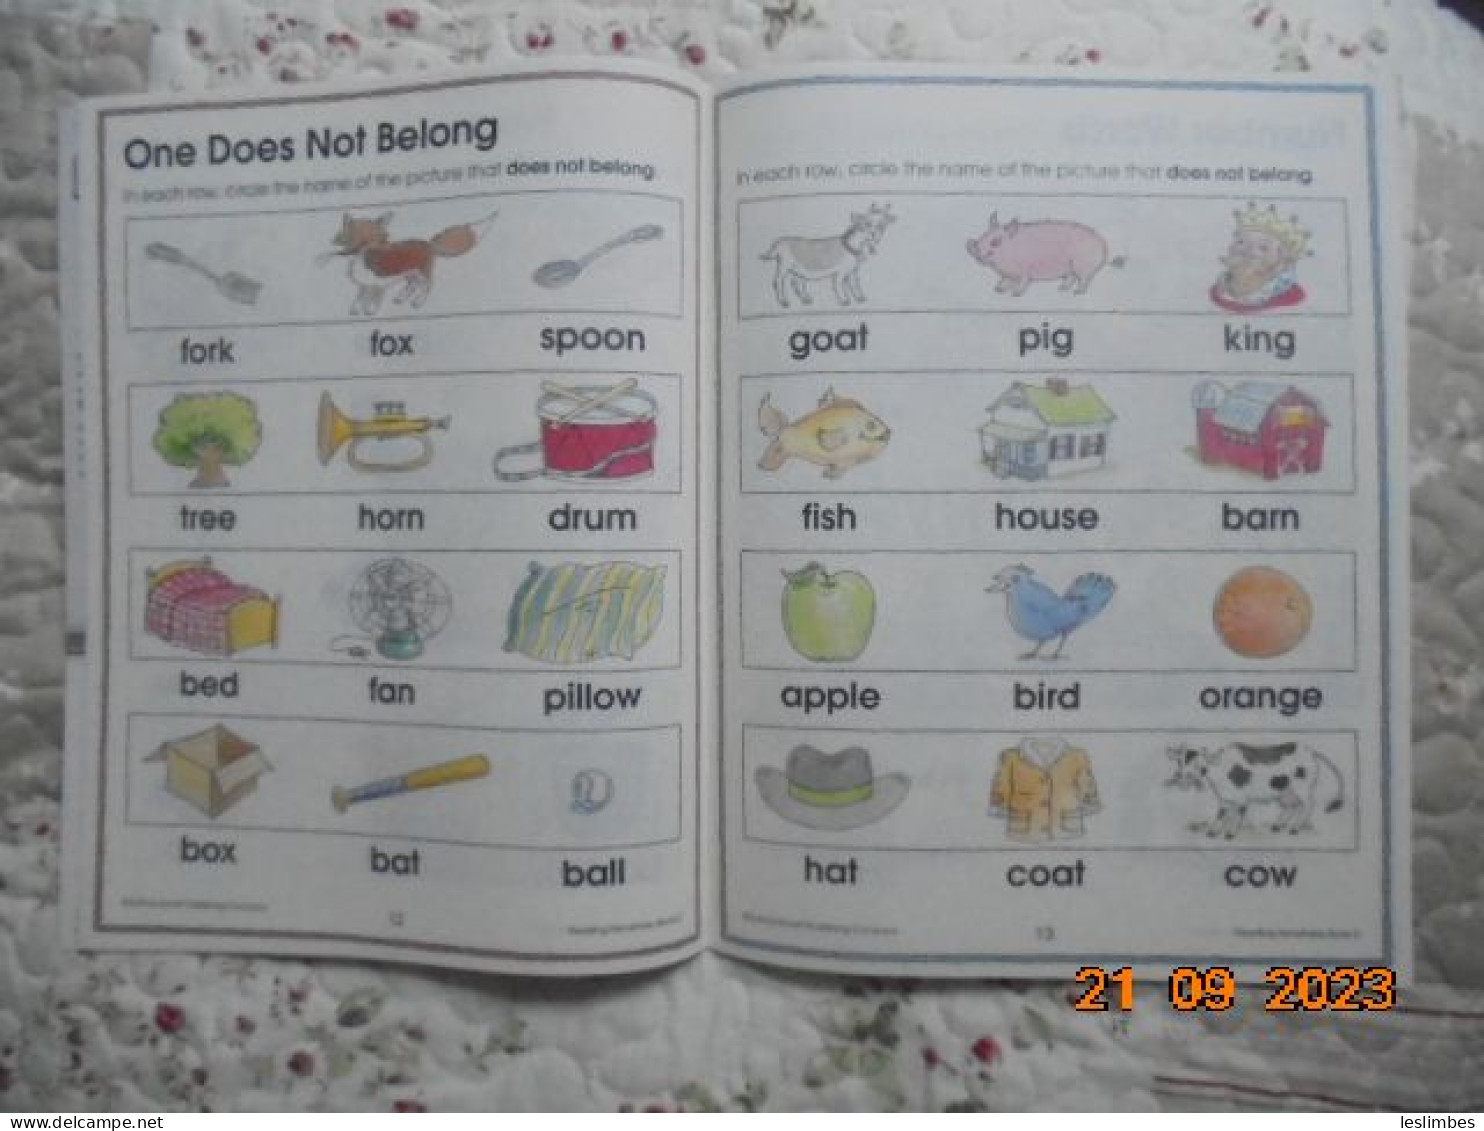 2015 School Zone "I Know It!" Reading Readiness Grades K-1 (ages 5-7) Book 2 - Langue Anglaise/ Grammaire